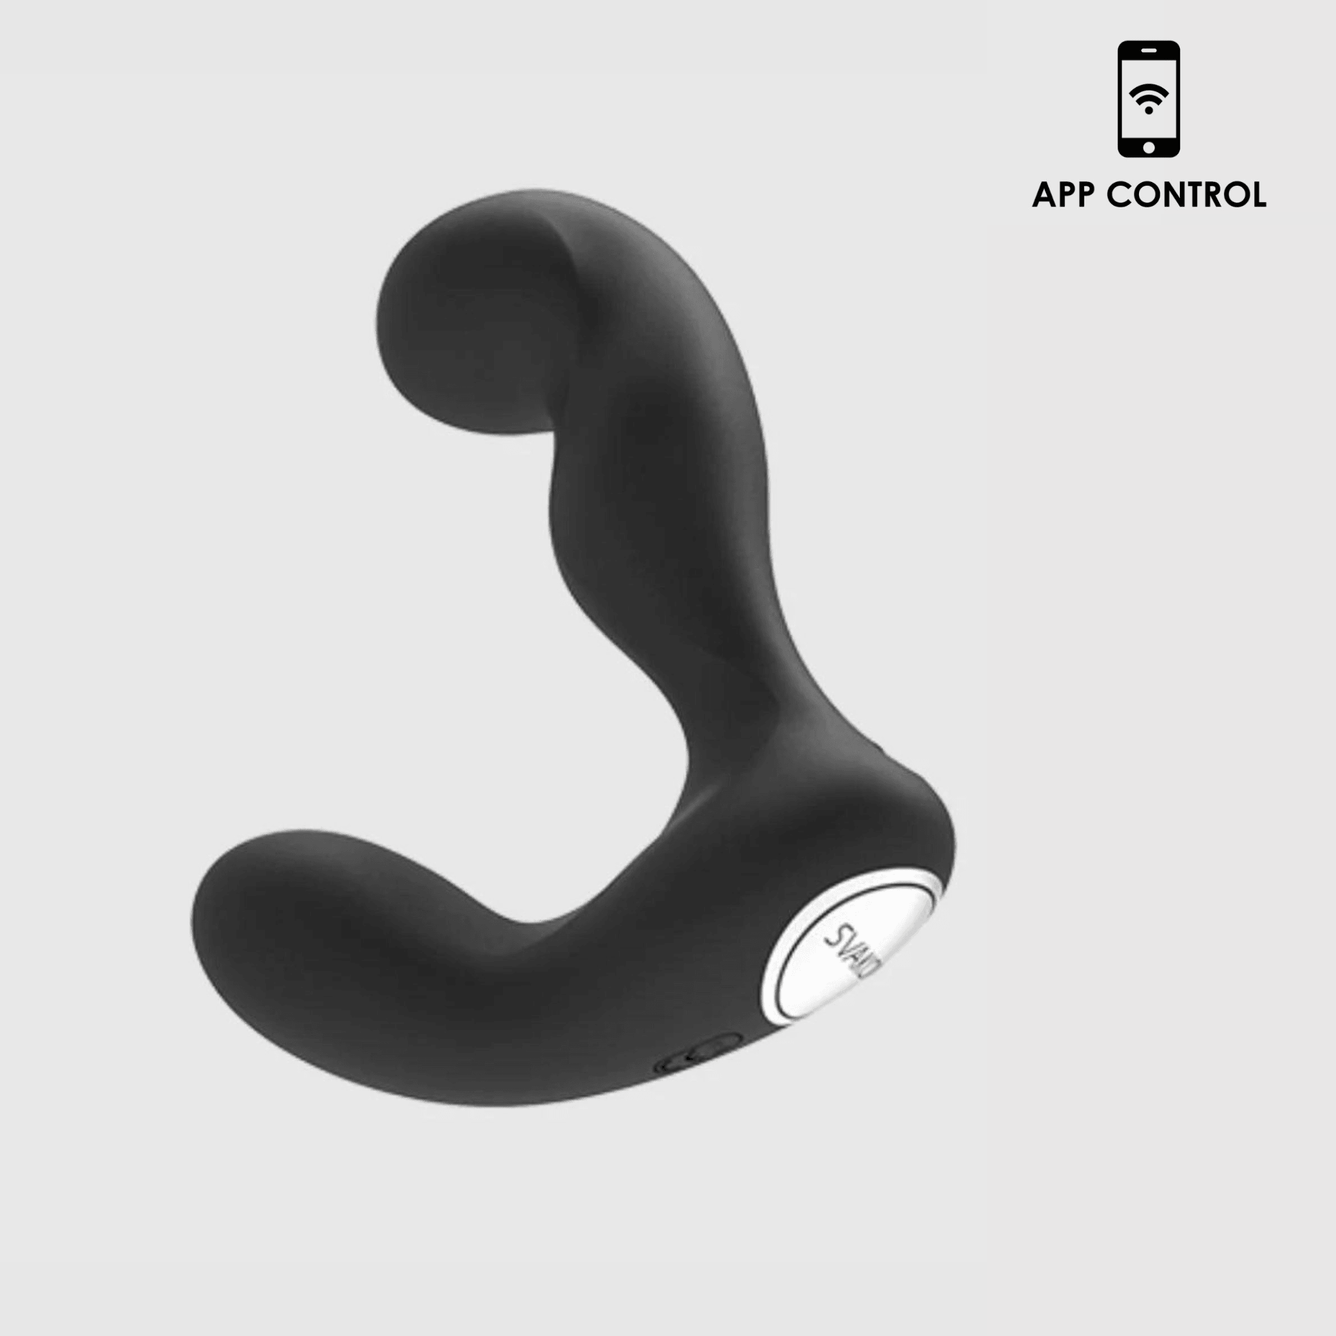 Svakom Iker Silicone APP-Controlled Prostate and Perineum Pulsing Vibrator Black